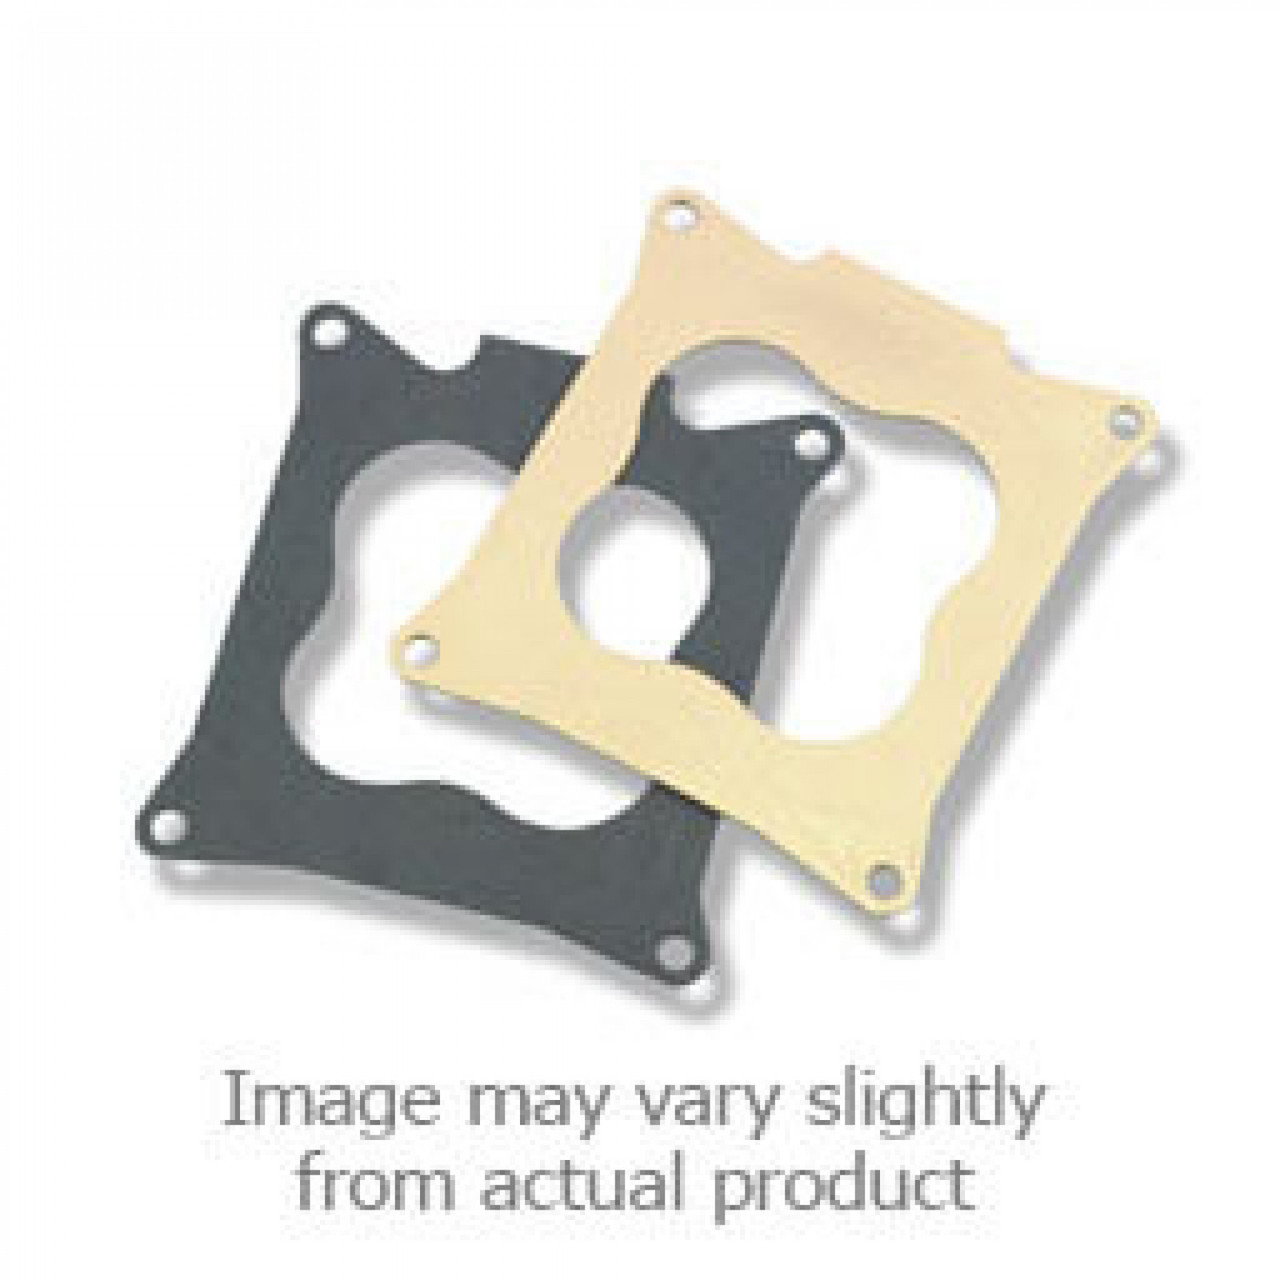 Holley EFI Throttle Body Base Plate And Gasket Set (HOE-2508-18)